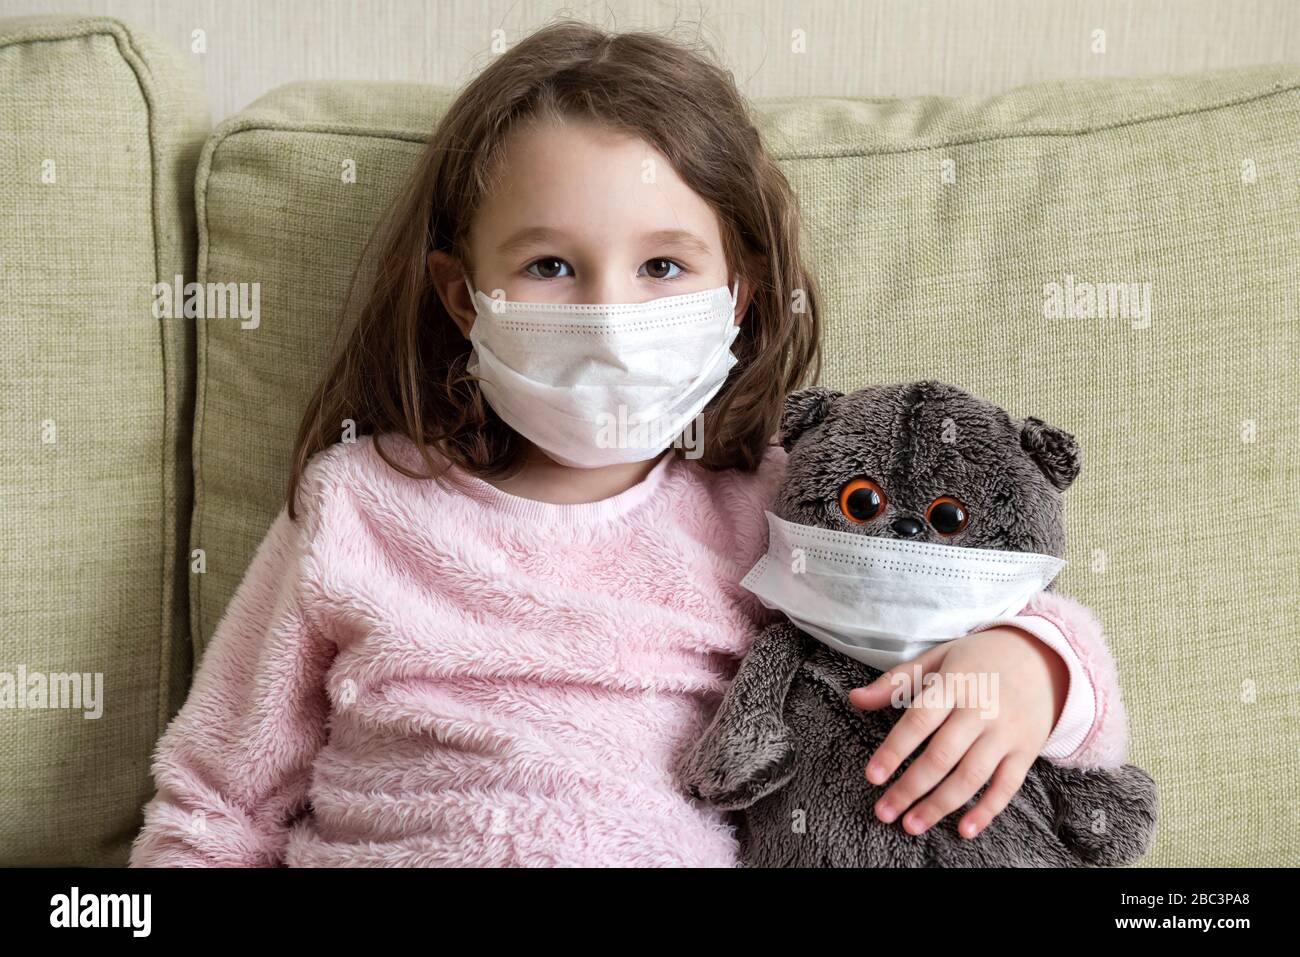 Stay at home in quarantine, funny kid with toy on couch during COVID-19 coronavirus pandemic. Little girl in medical mask for protection to corona vir Stock Photo